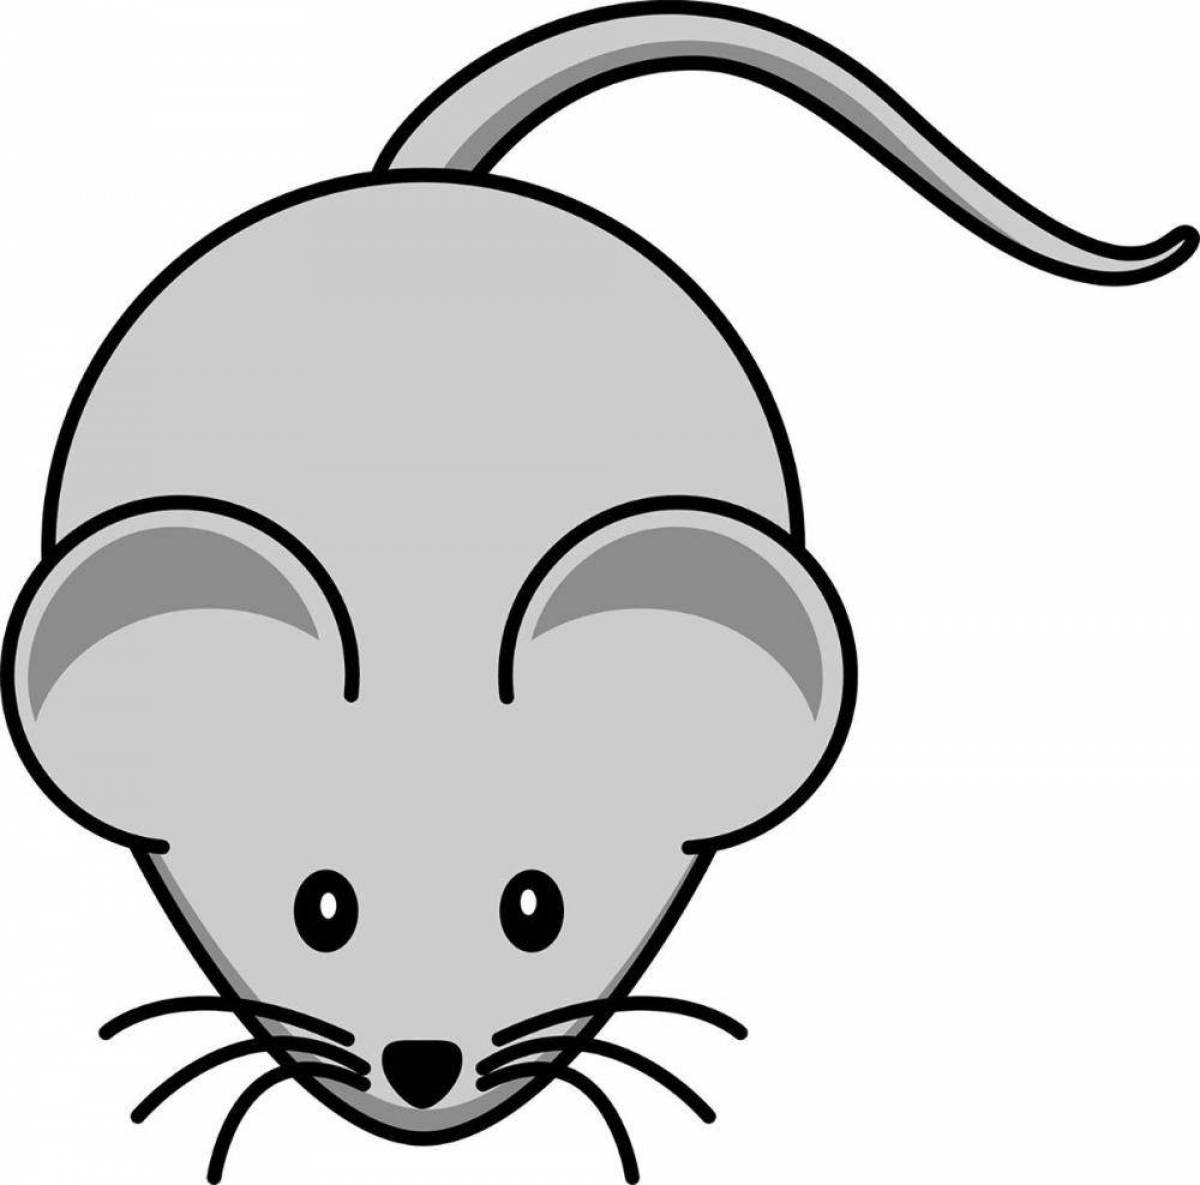 Merry coloring book mouse for children